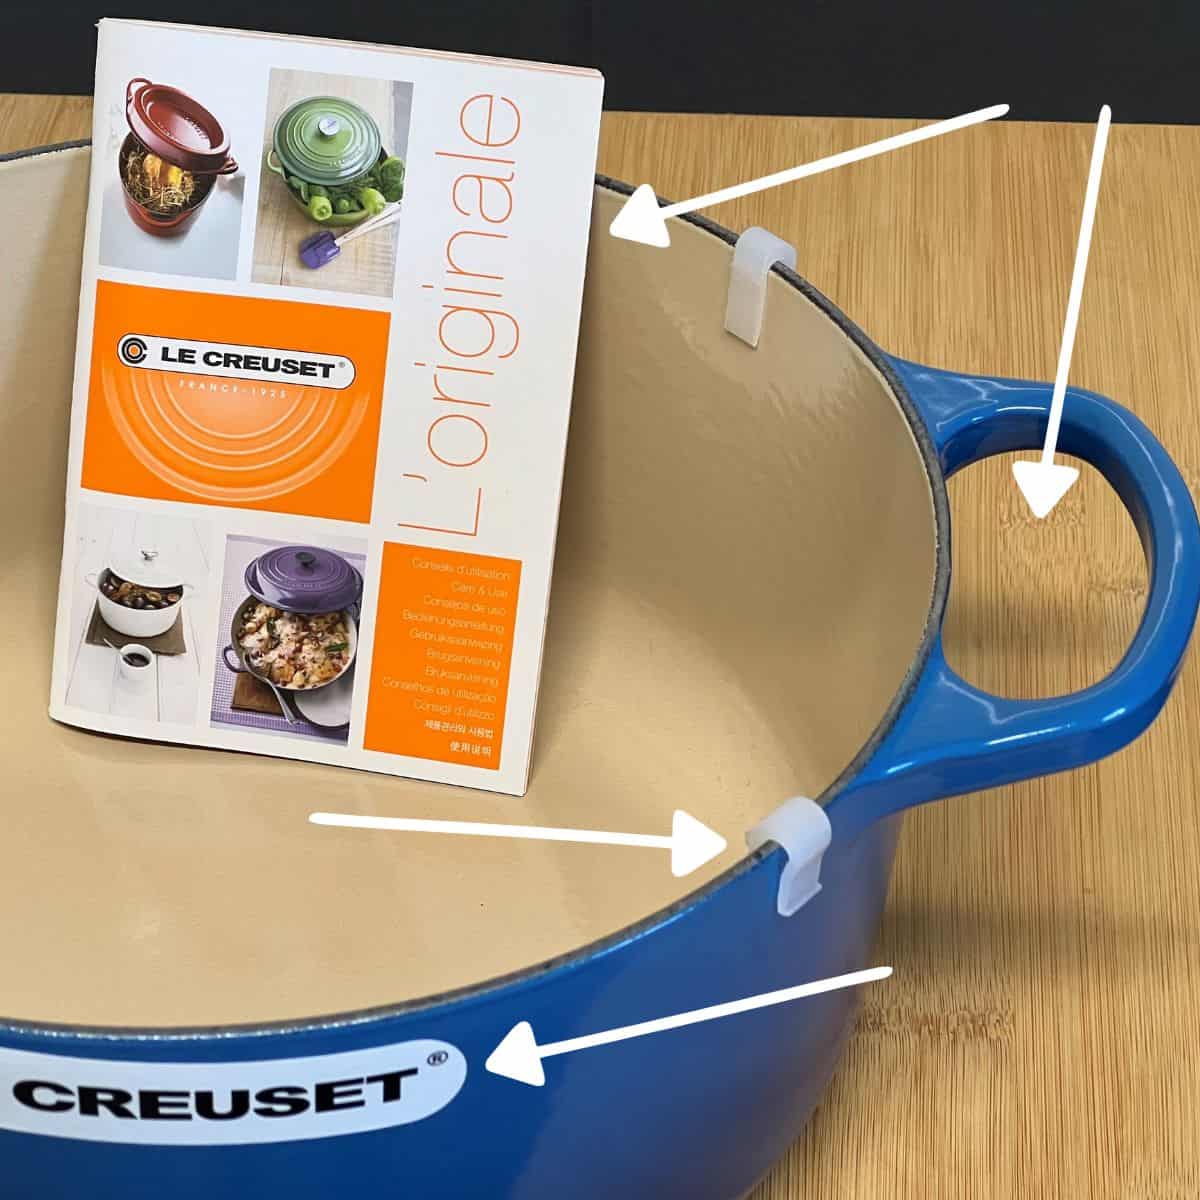 whats in the box of new le creuset cookware